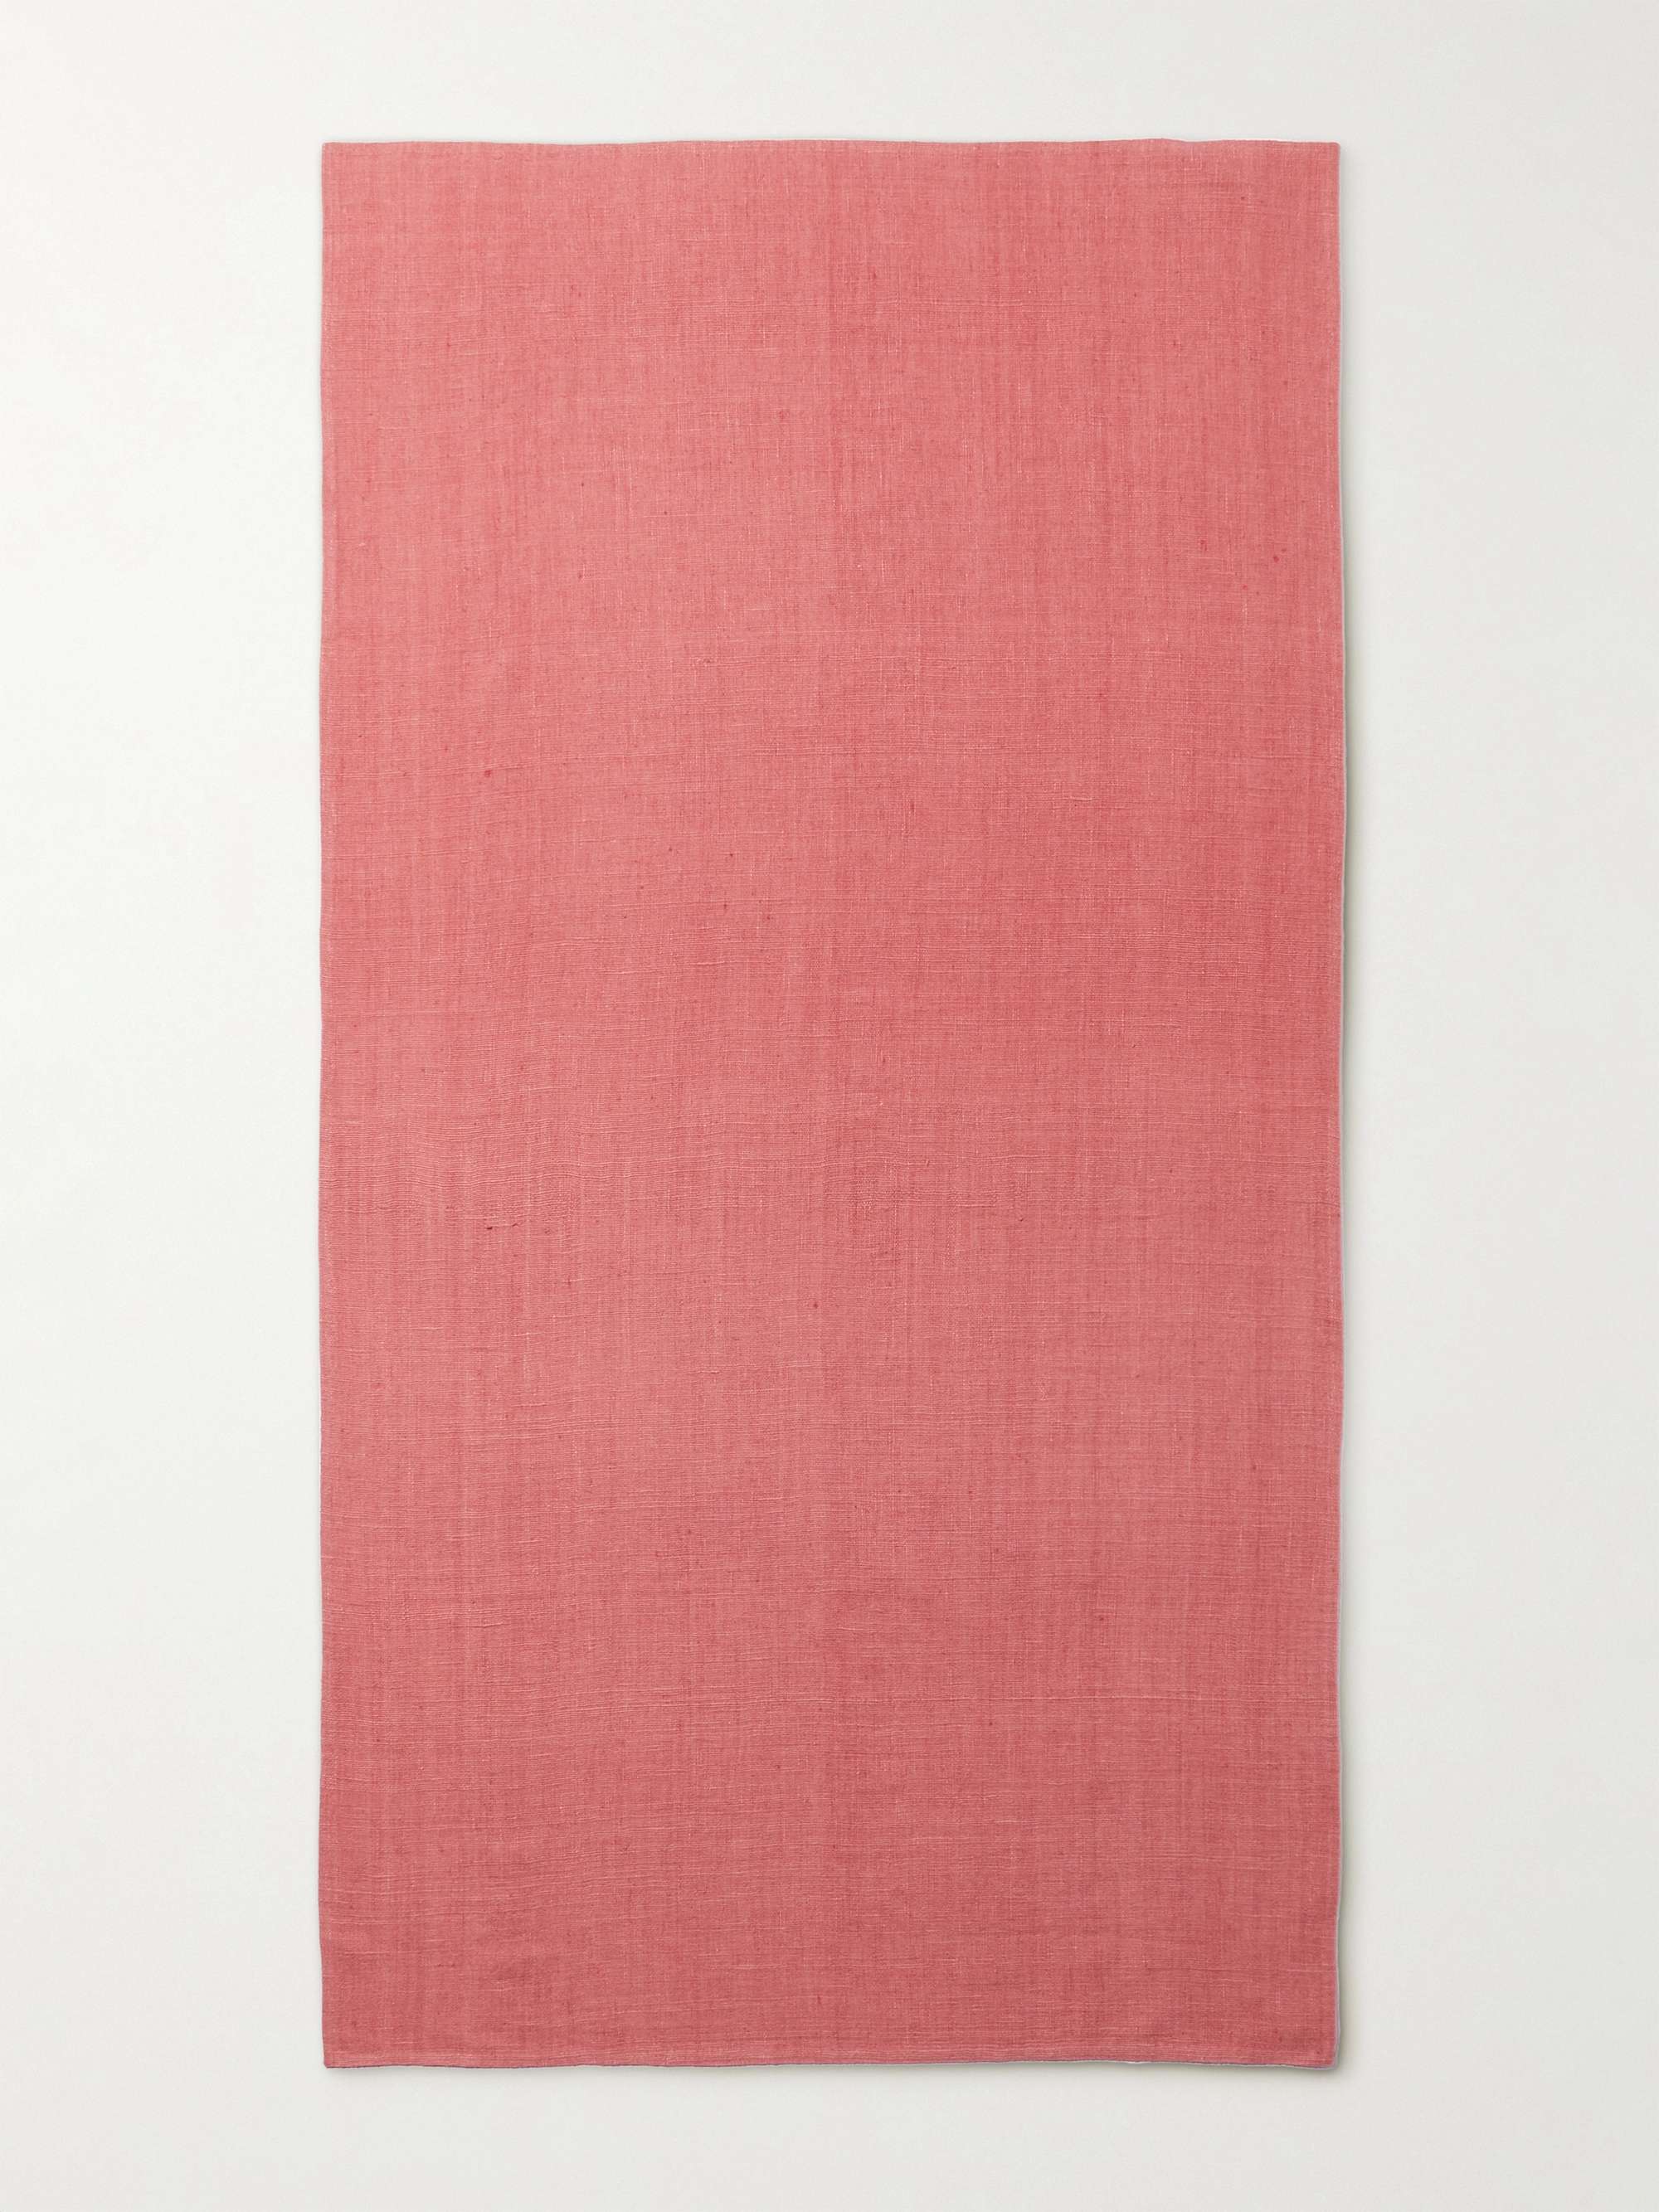 11.11/ELEVEN ELEVEN Hand-Dyed Organic Cotton Towel